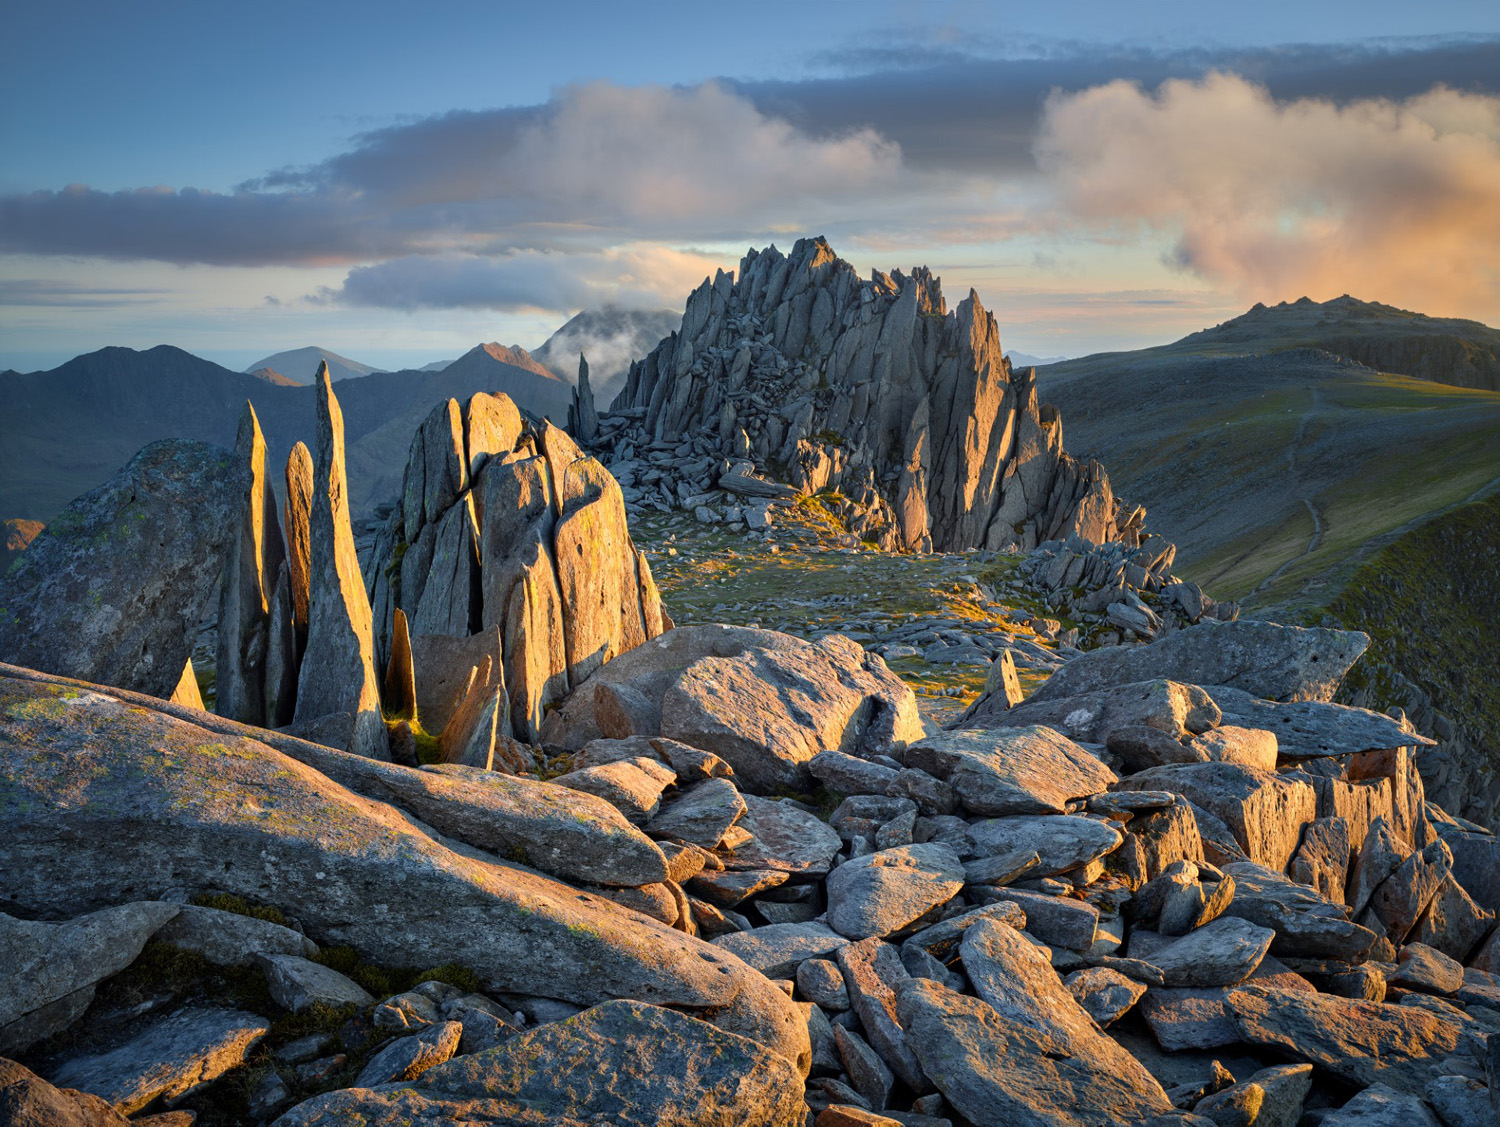 Dynamic landscape photograph showcasing rugged, jagged rock formations, known as the 'Fortress of the Four Winds,' under a soft golden hour light. The foreground is littered with large, angular boulders, while in the background, a range of pointed mountain peaks stretches under a sky with wispy clouds at sunset.